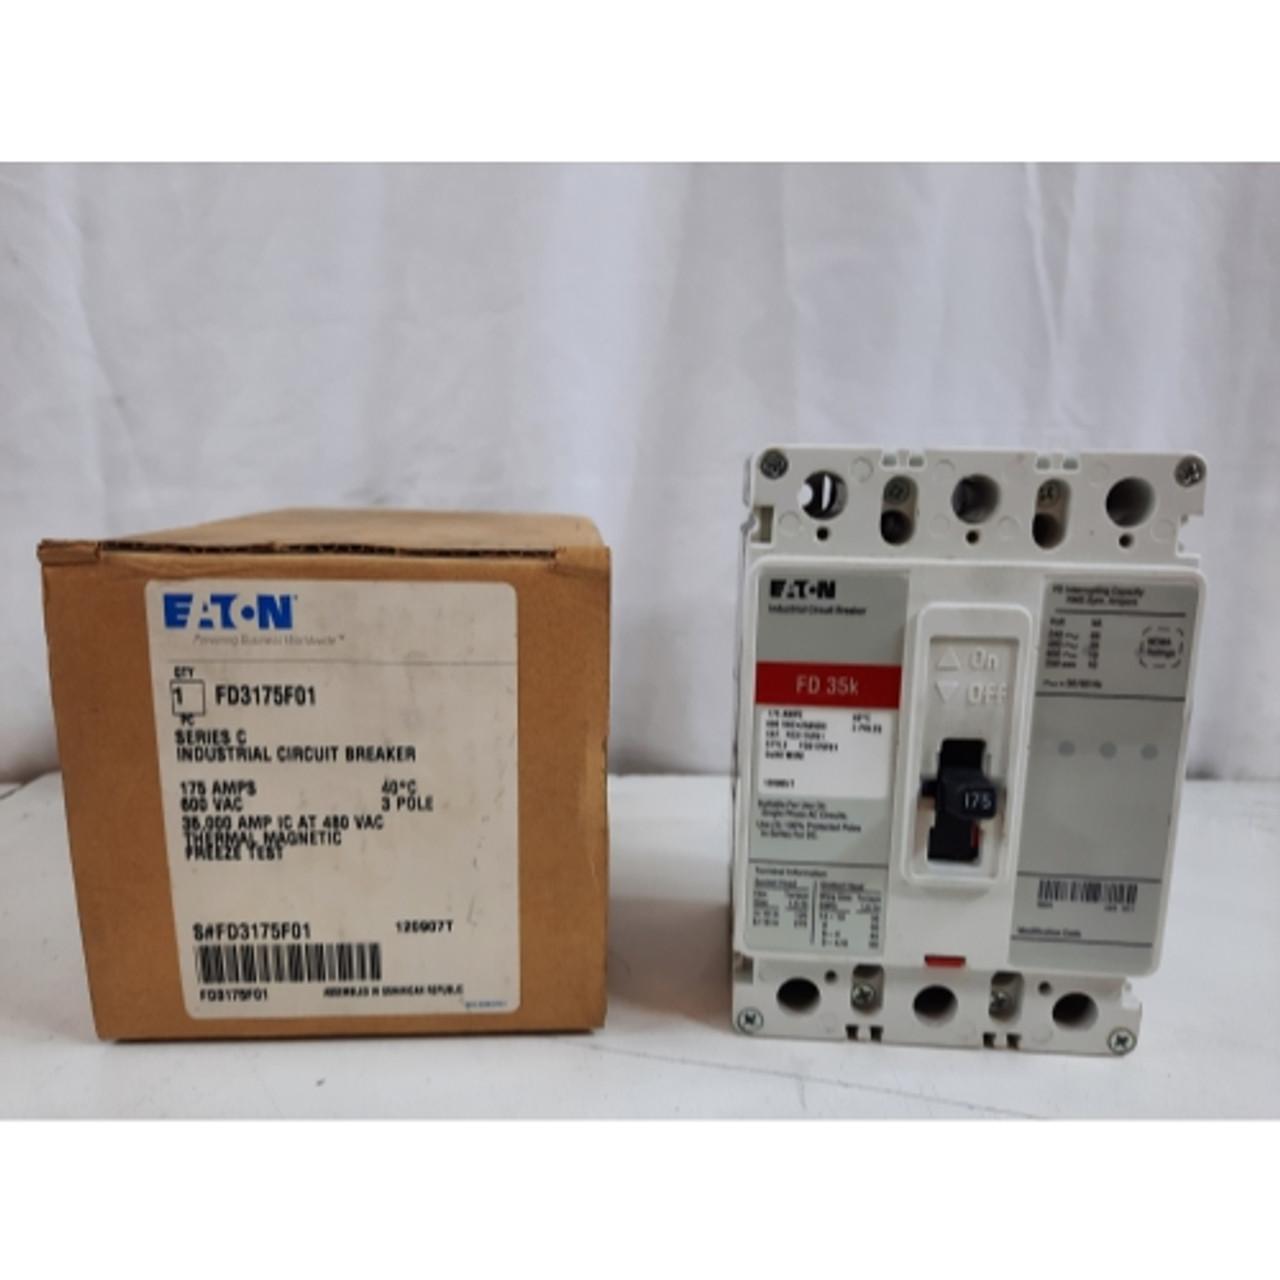 Eaton FD3175F01 Eaton Series C complete molded case circuit breaker, F-frame, FD, Complete breaker, Fixed thermal, Fixed magnetic trip type, Three-pole, 175 A, 600 Vac, 250 Vdc, 65 kA at 240 Vac, 35 kA at 480 Vac